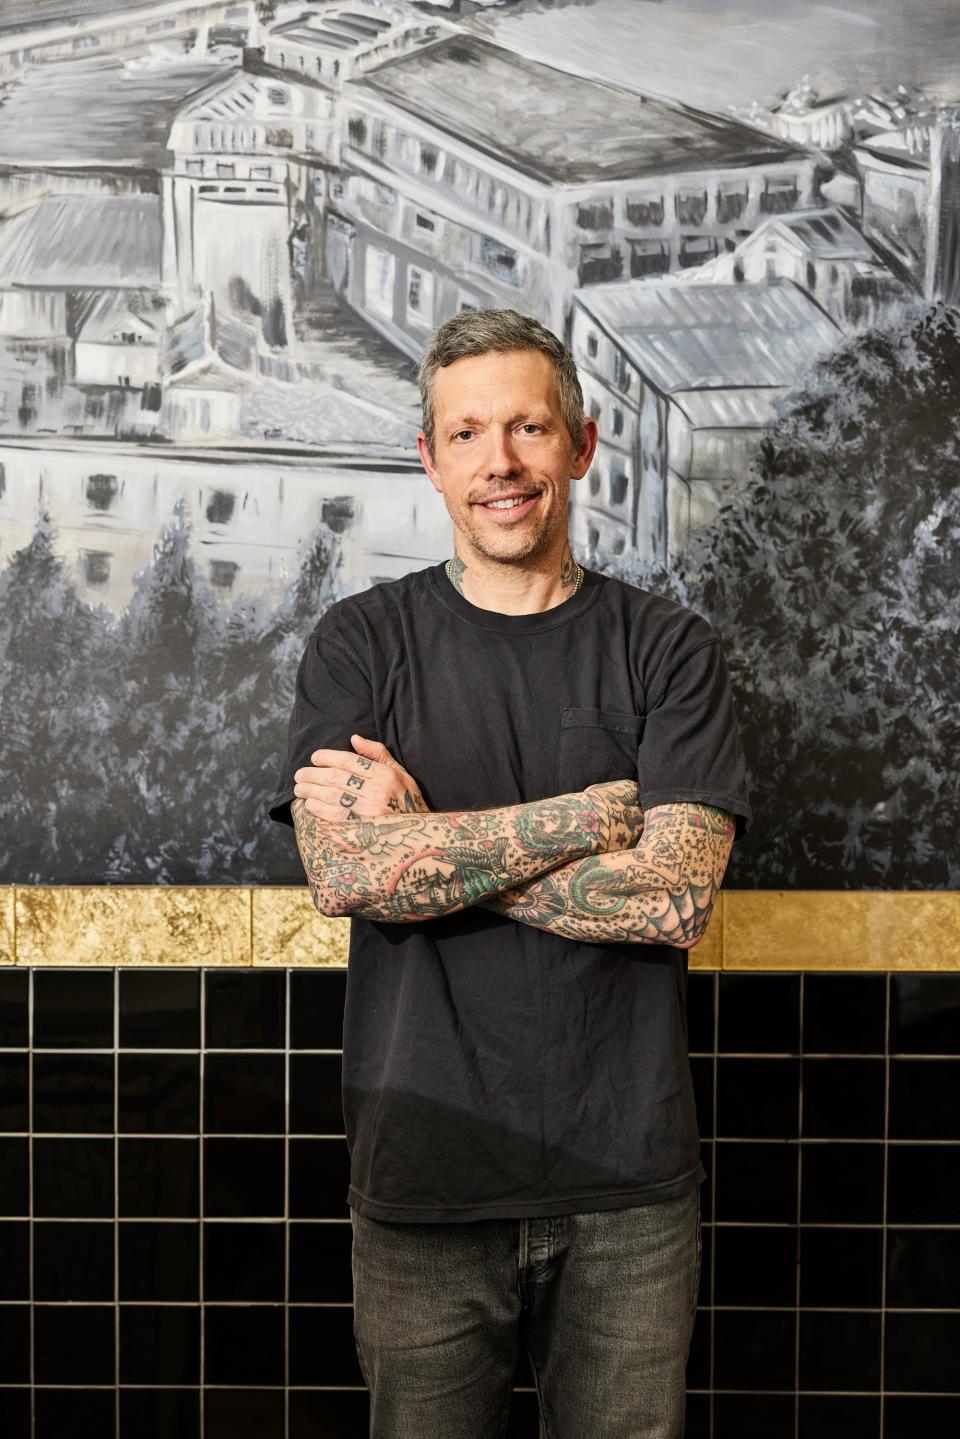 Chef Anthony Mangieri, founder of Una Pizza Napoletana on the Lower East Side of New York City. The pizzeria was named No. 1 in the U.S. in the 50 Top Pizza rankings.